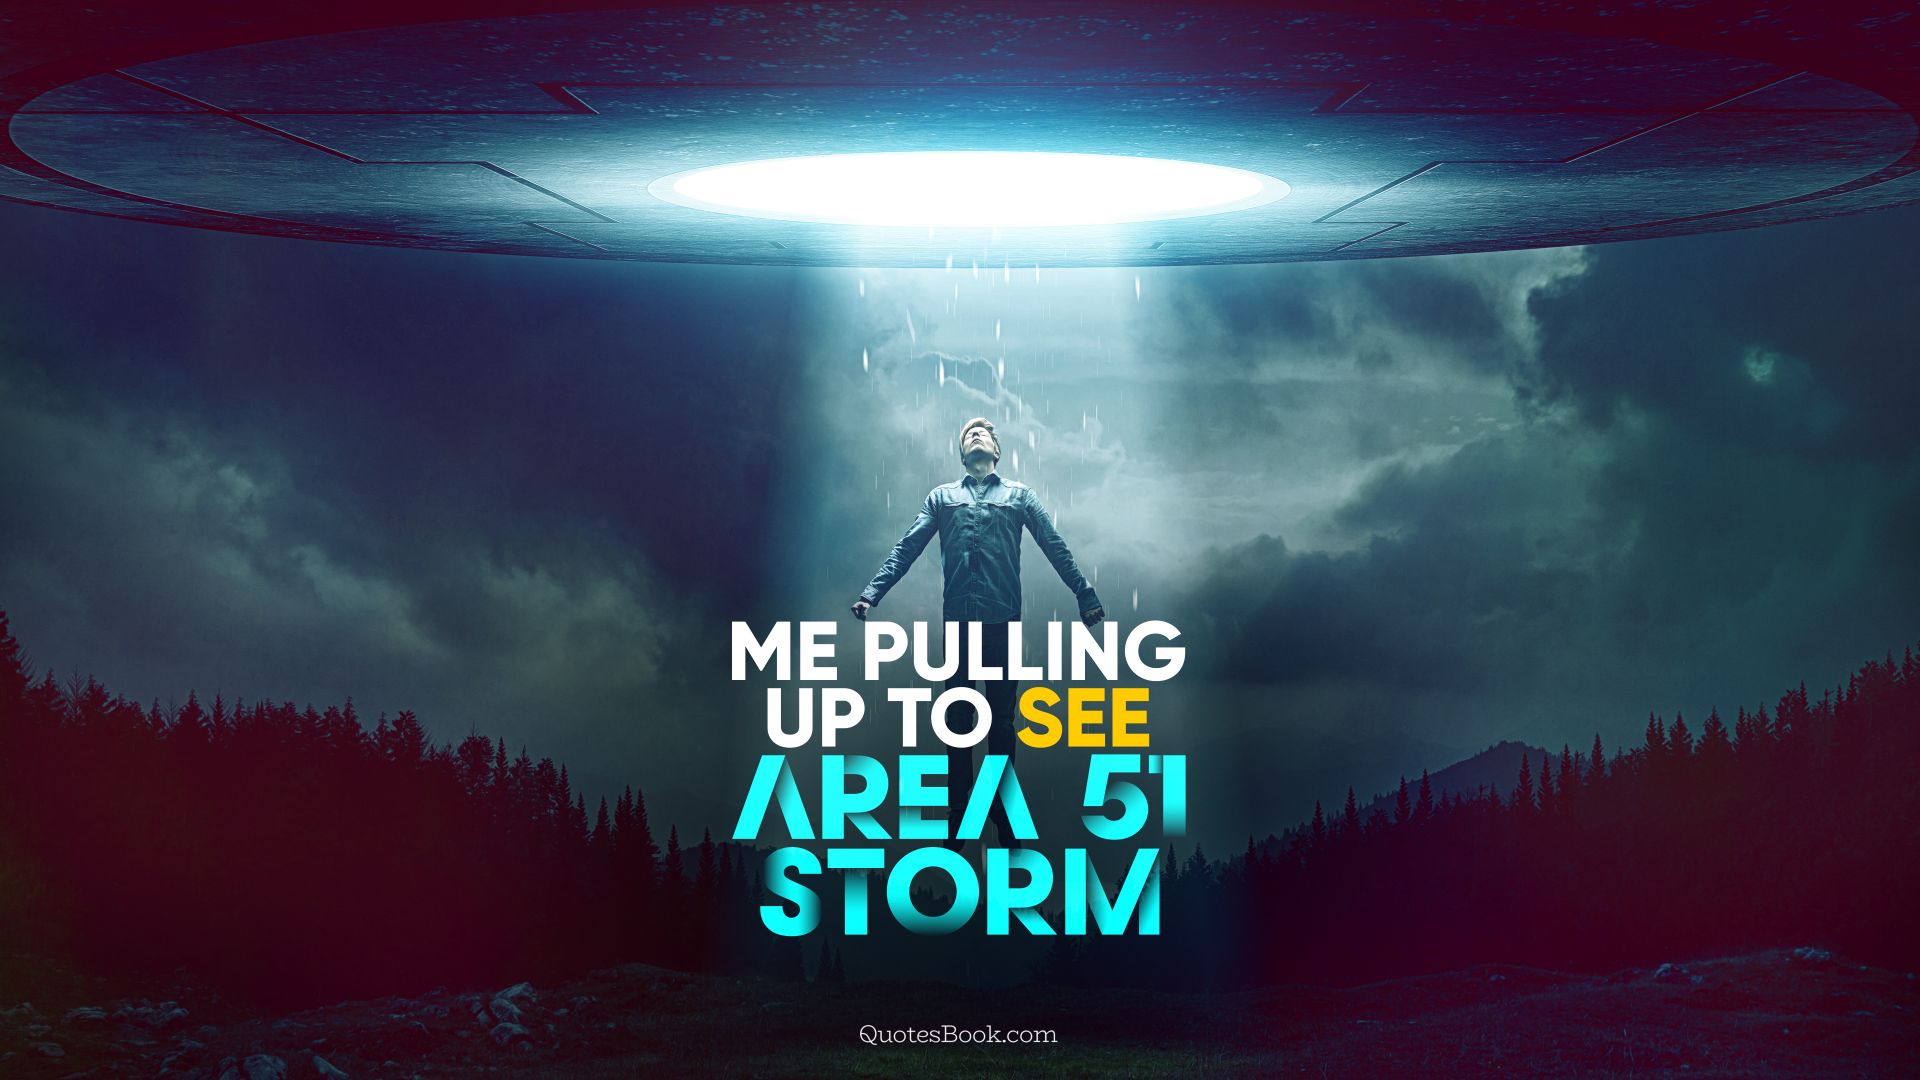 Me pulling up to see Area 51 storm